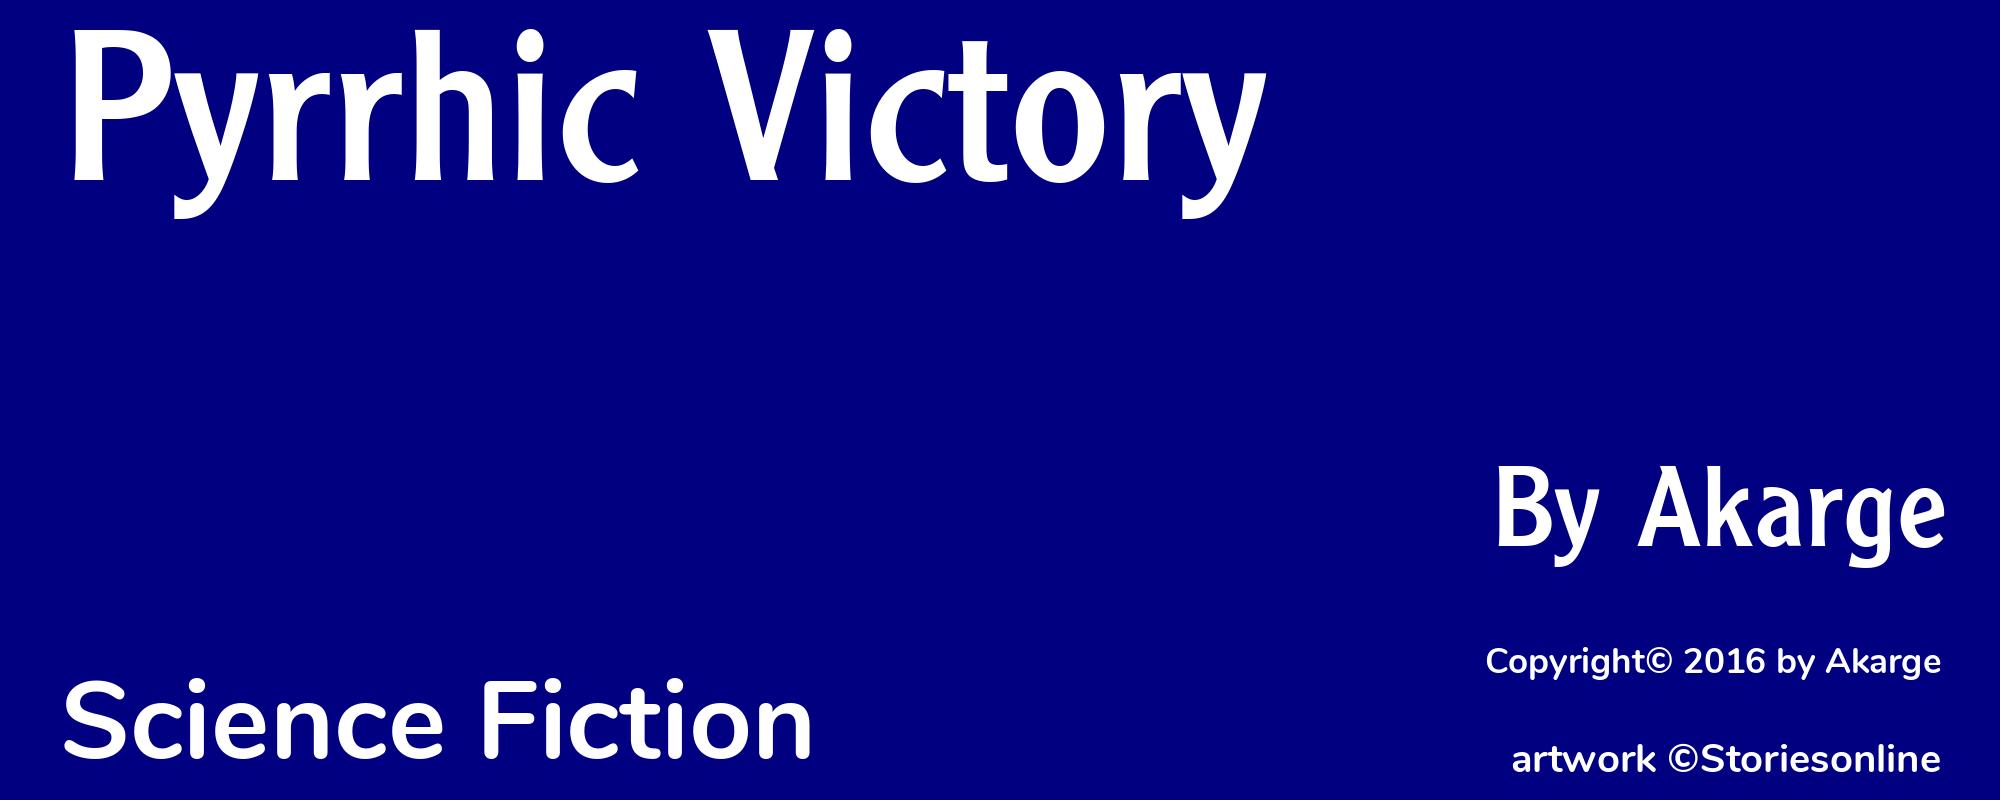 Pyrrhic Victory - Cover